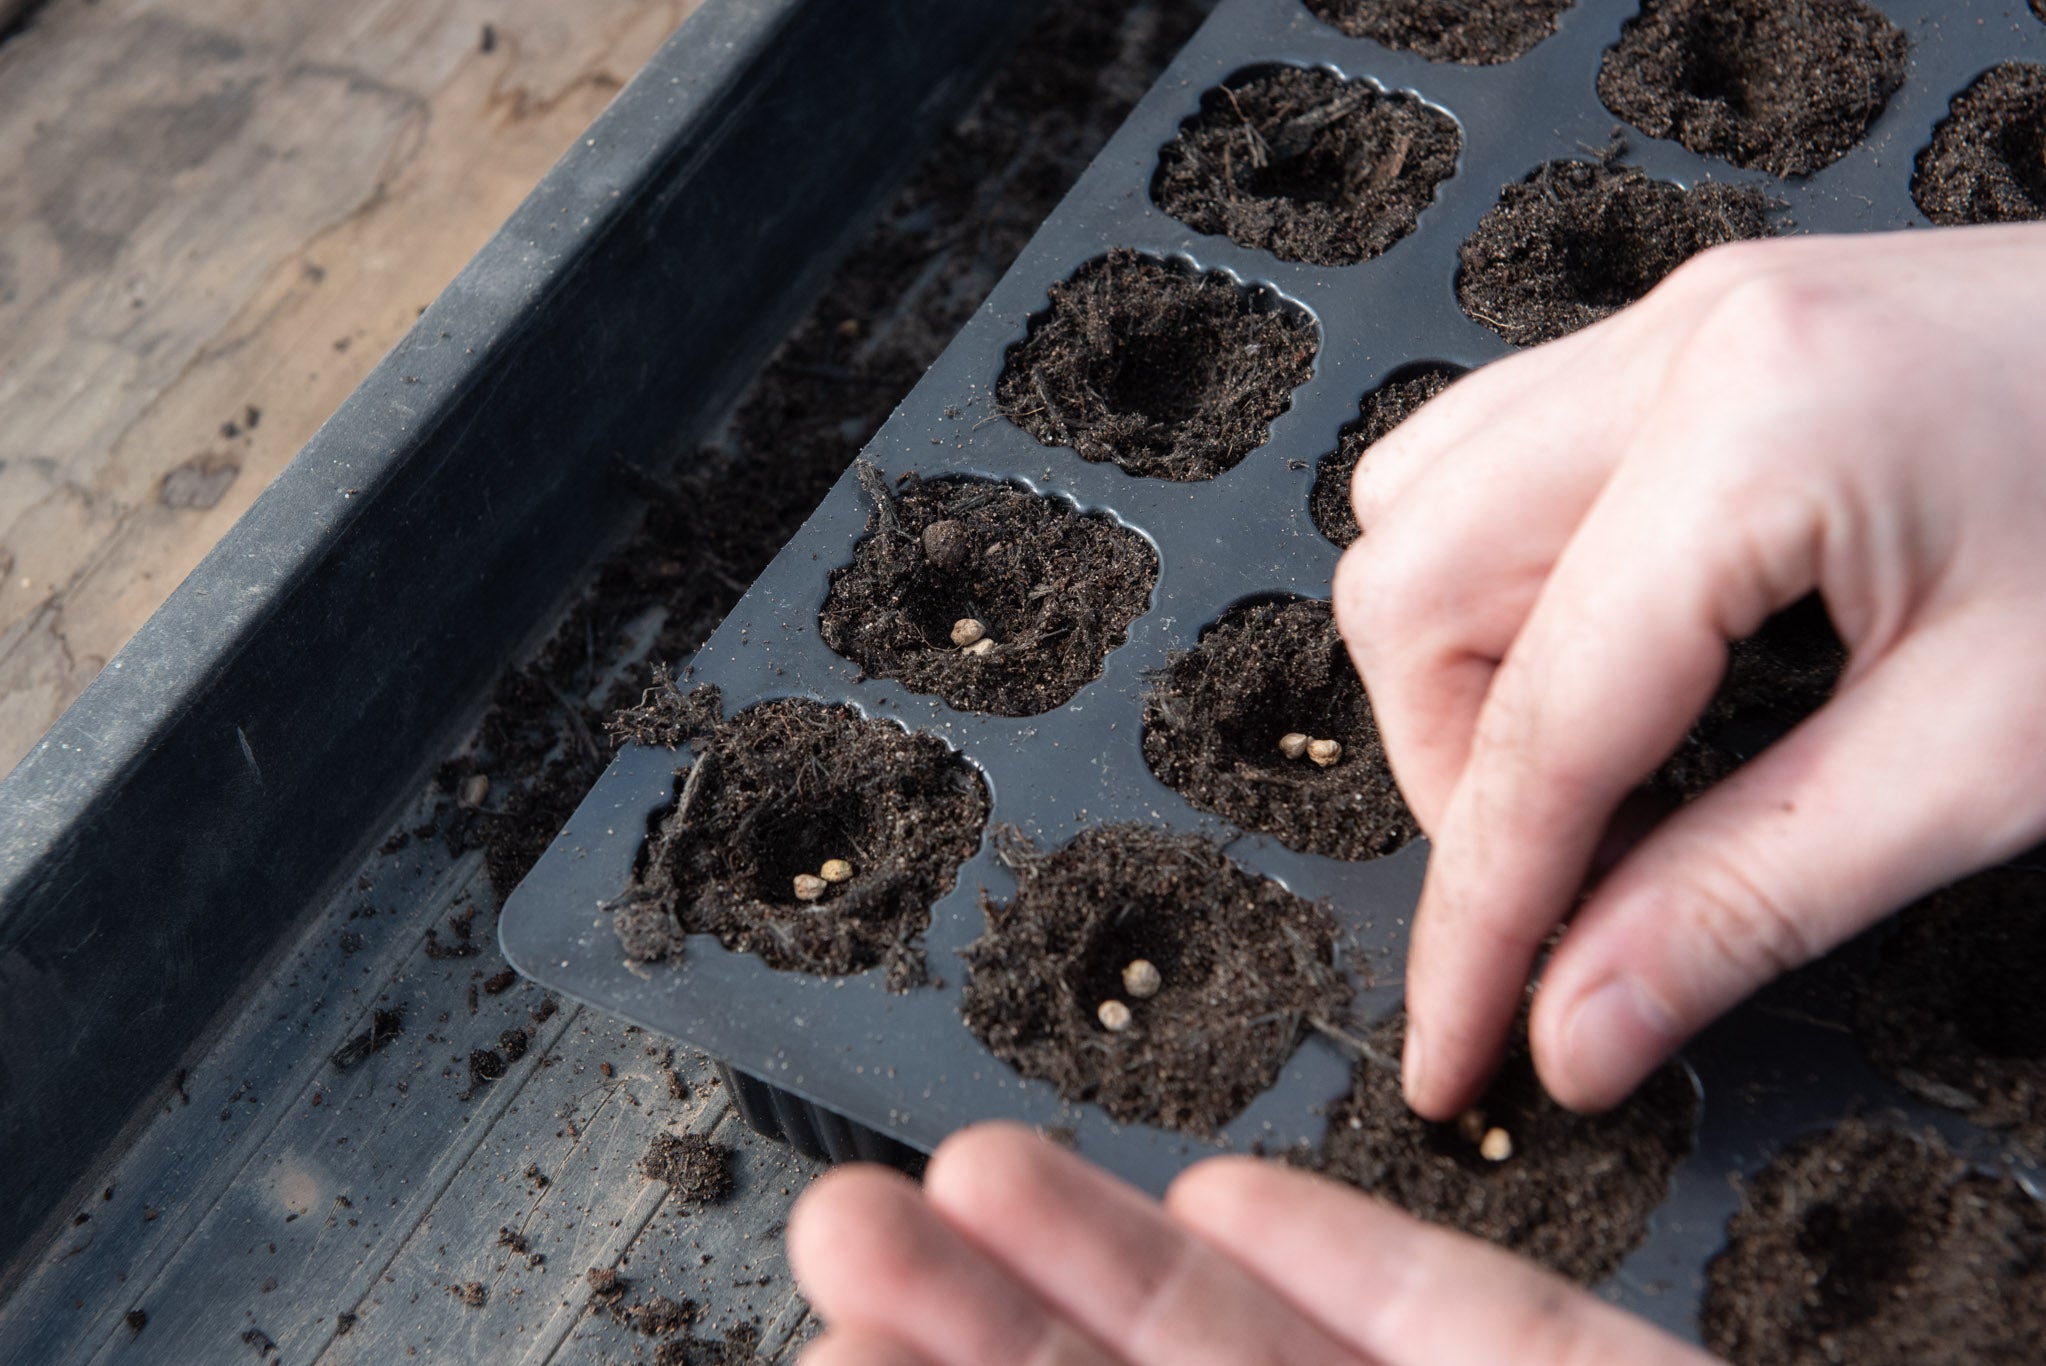 How to sow seeds and grow your own fruits and vegetables for beginners